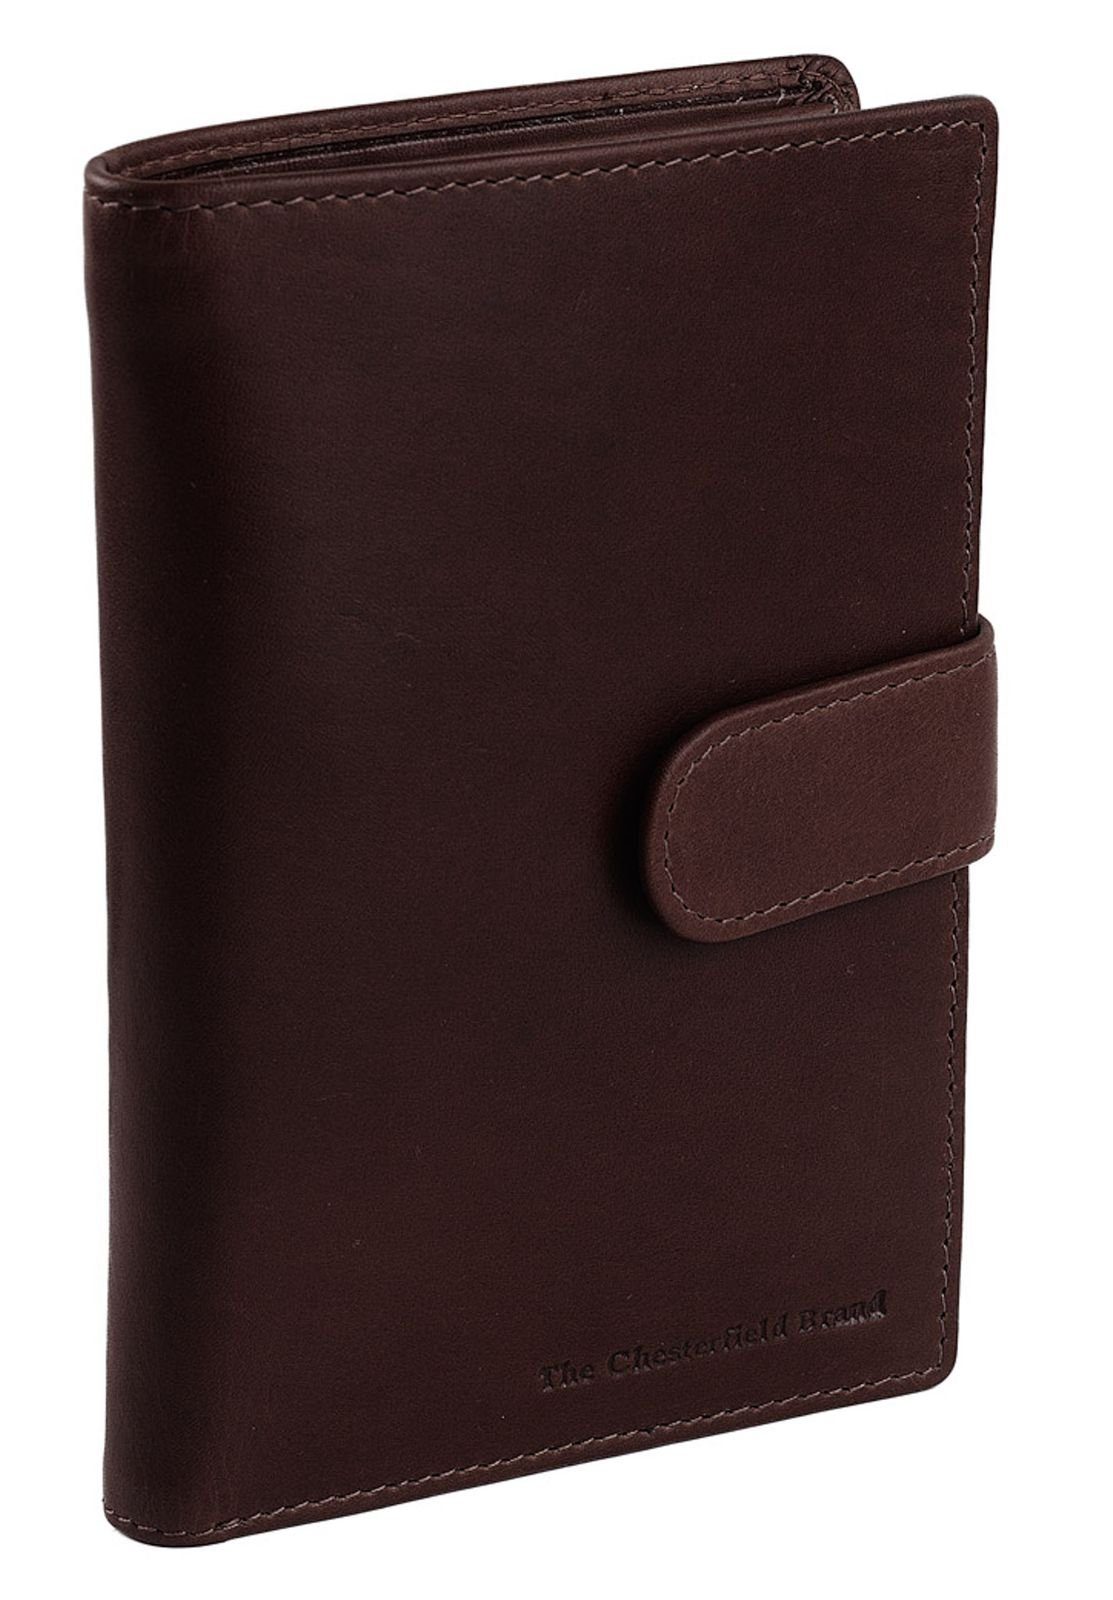 The Chesterfield Brand Etui Brown